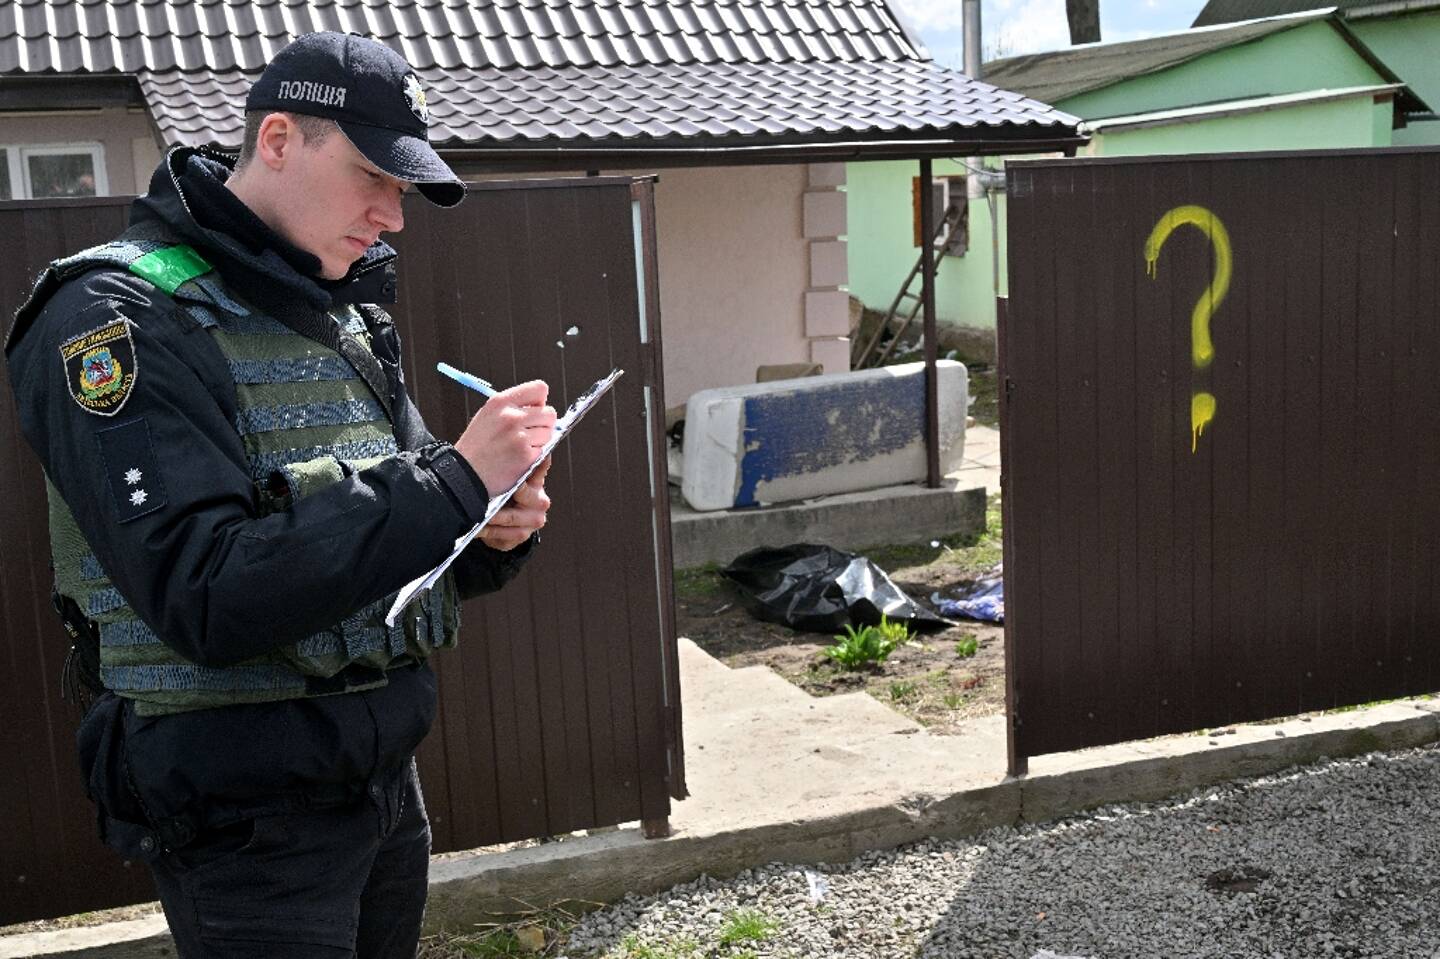 A police officer fills in a file during the excavation of the victims in Andriivka, near Kiev, on April 11, 2022 in Ukraine.